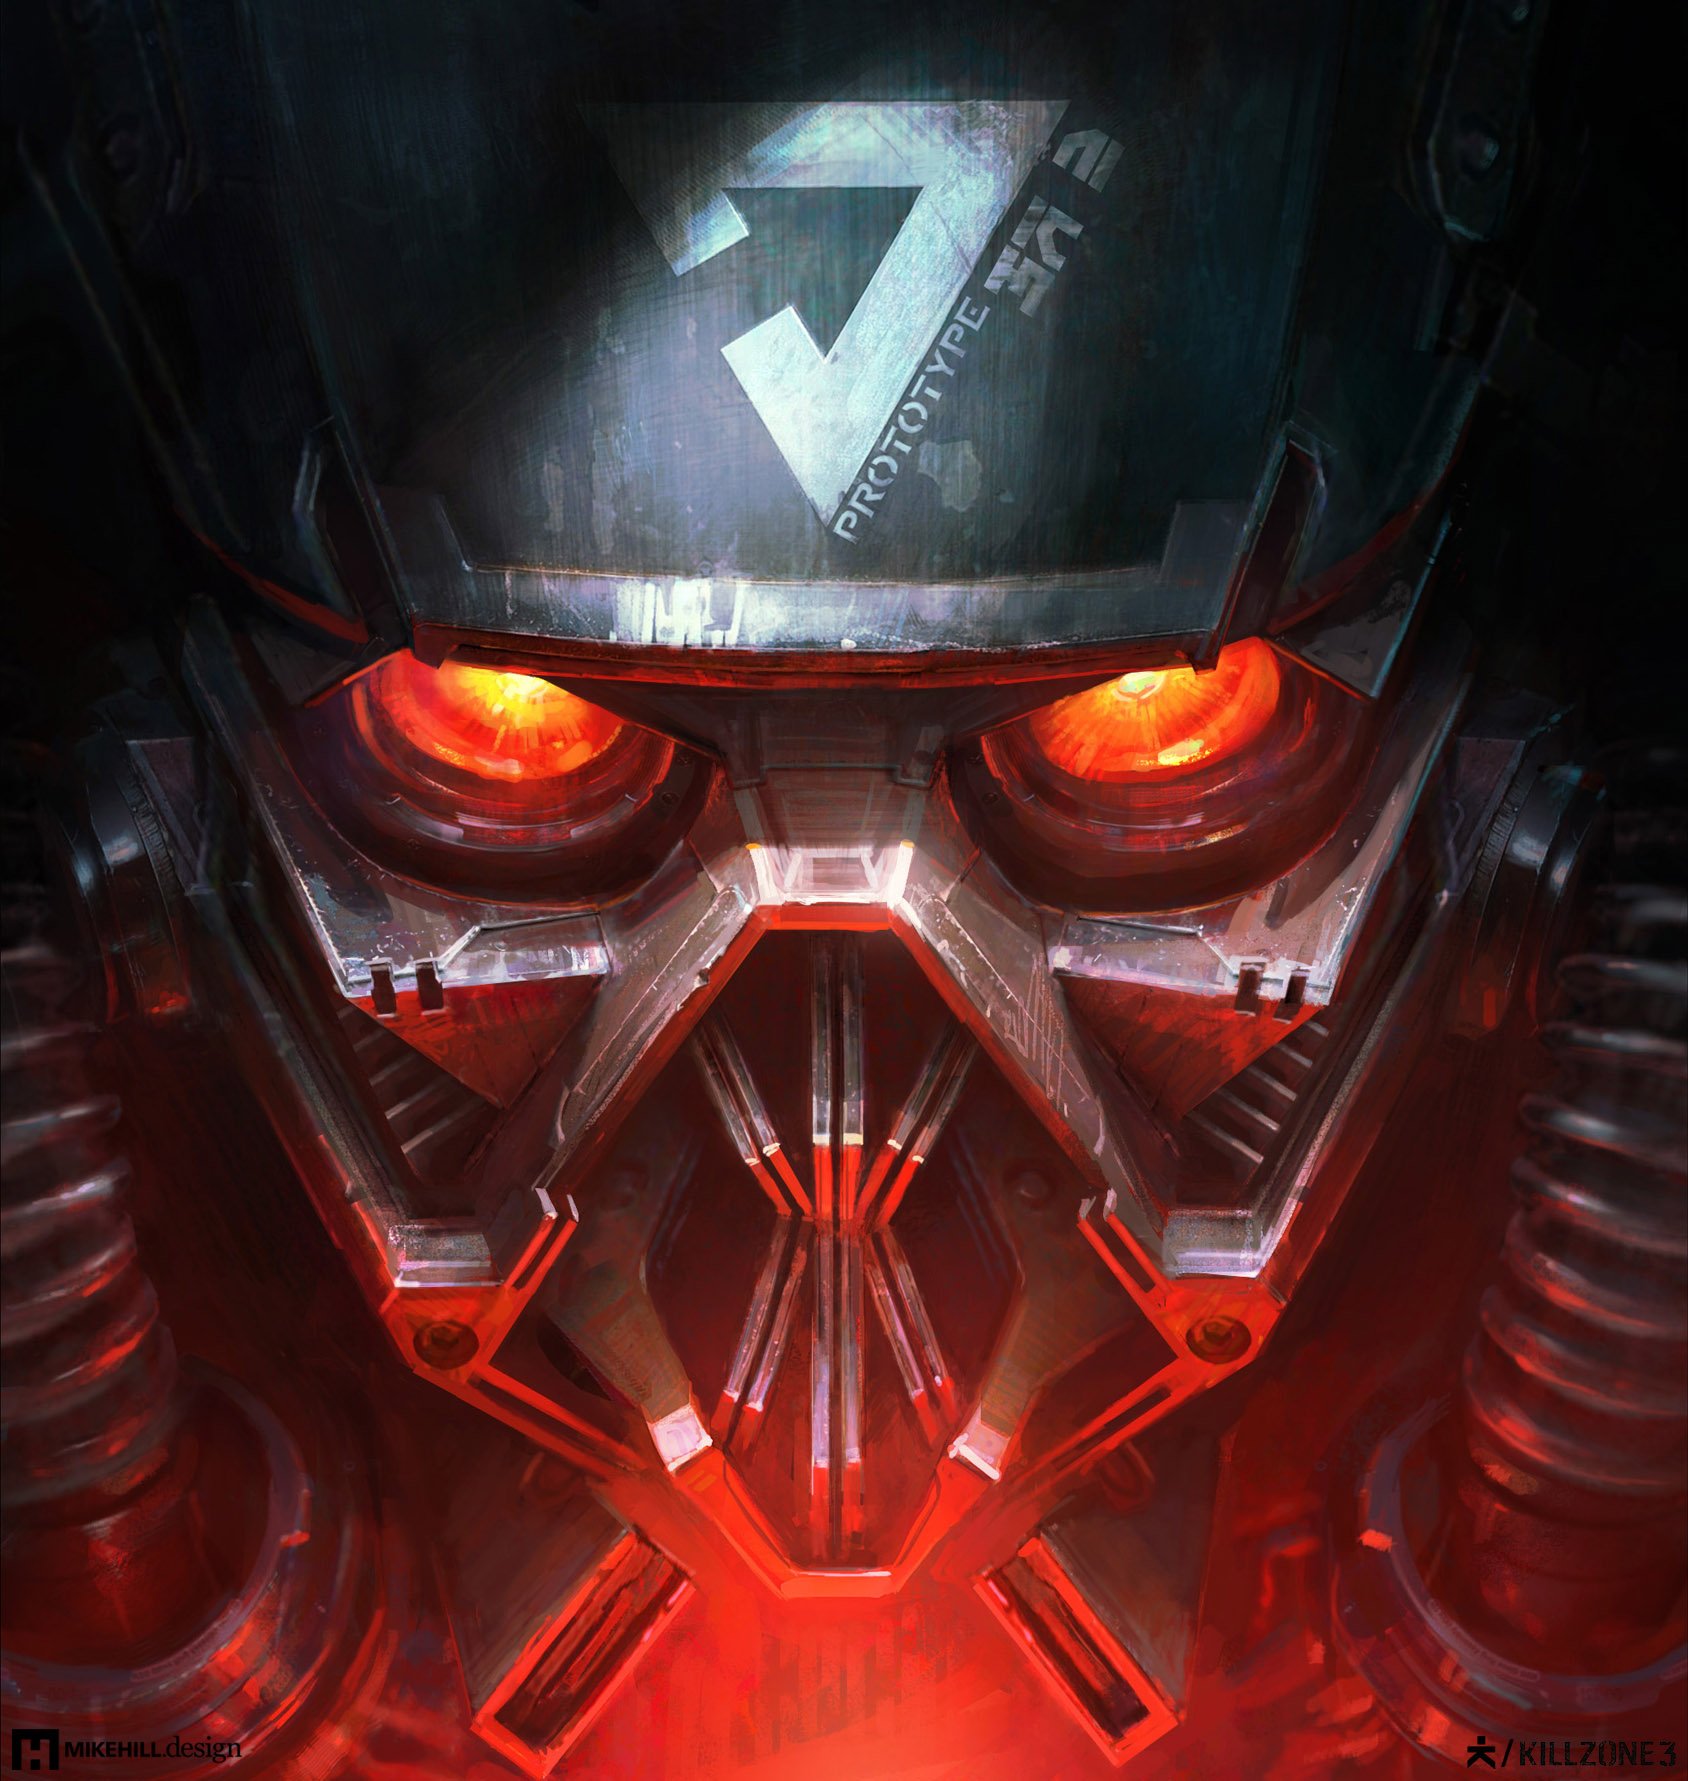 killzone, Stealth, Tactical, Warrior, Sci fi, Futuristic, Shooter, Action, Fighting Wallpaper